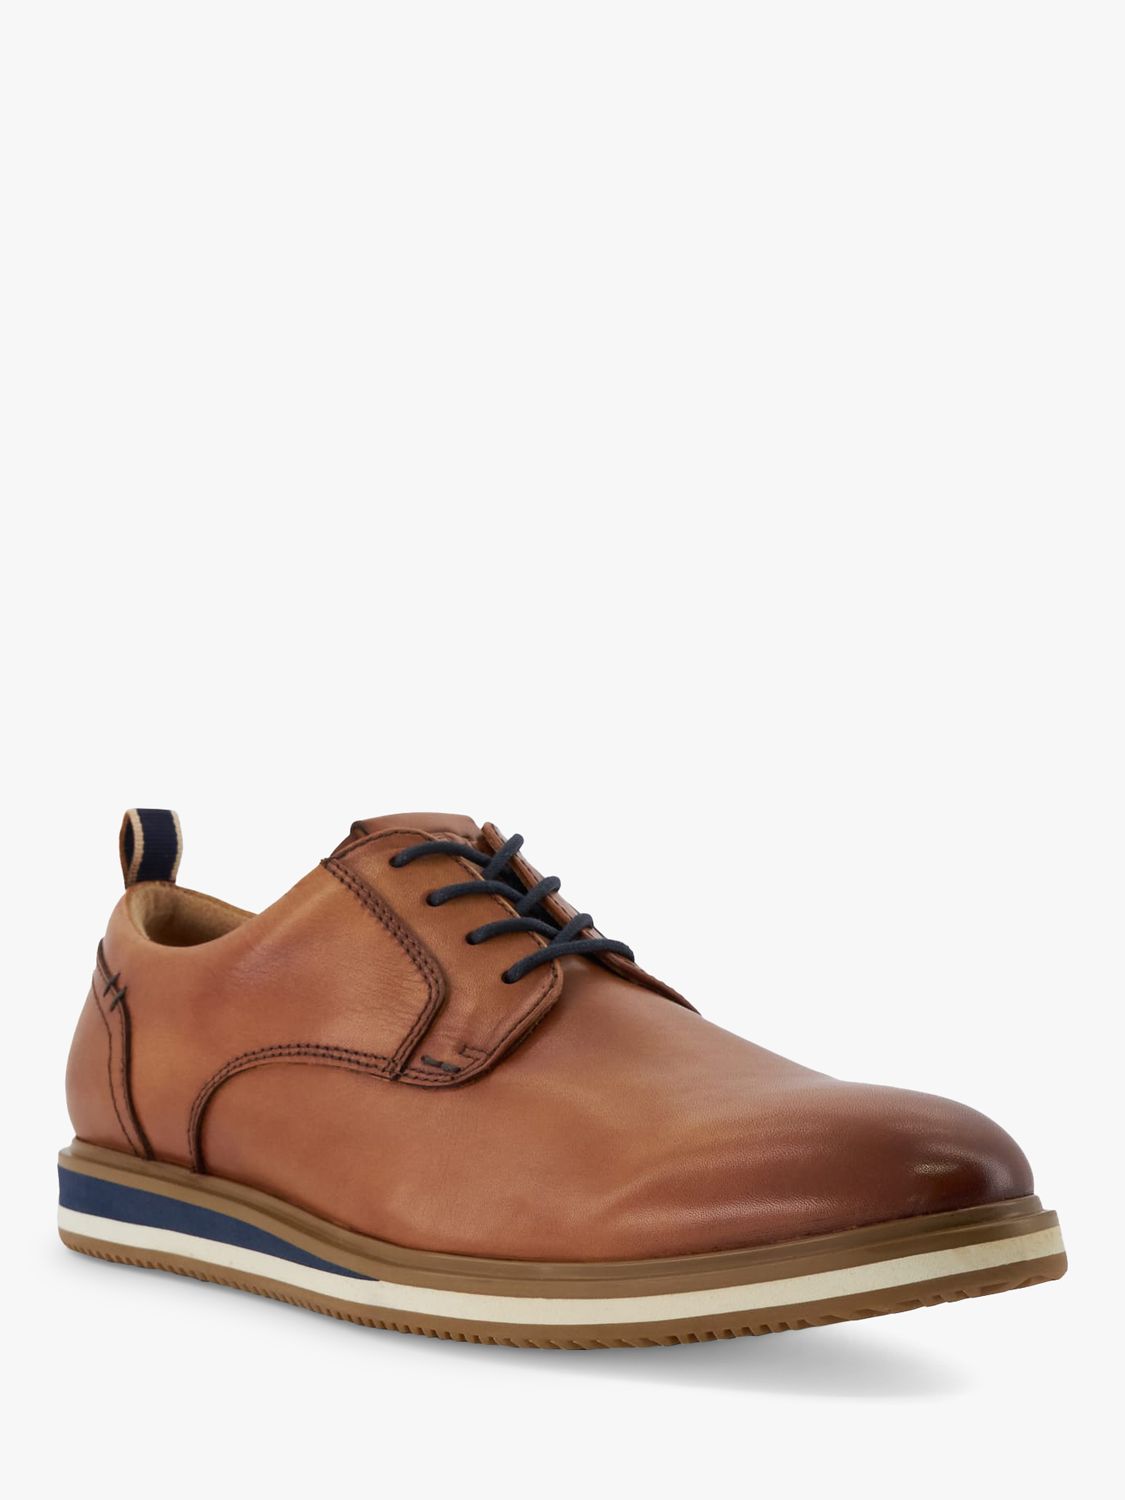 Dune Blaksley Leather Lace-Up Shoes, Tan, 9